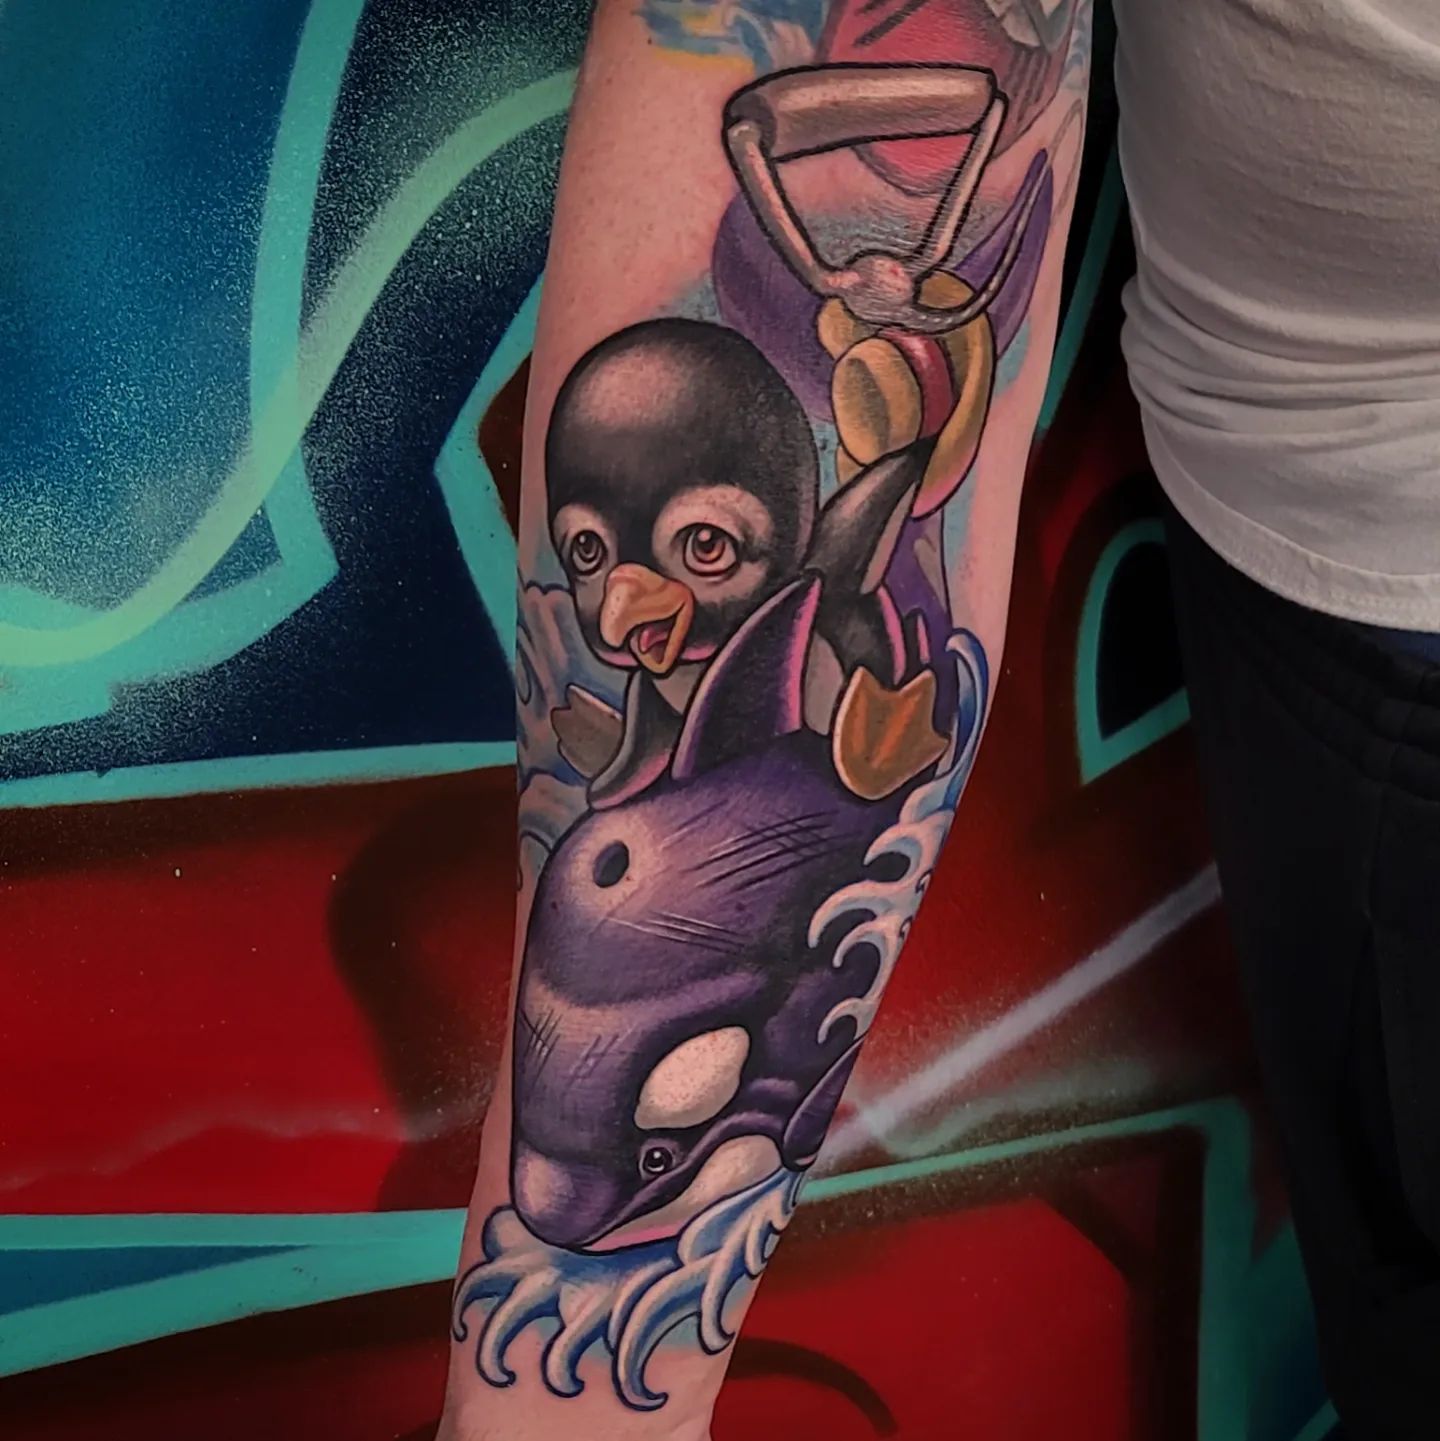 How amazing the color palette is in this tattoo! The combo of Orca and a penguin will take your tattoo to a different level.